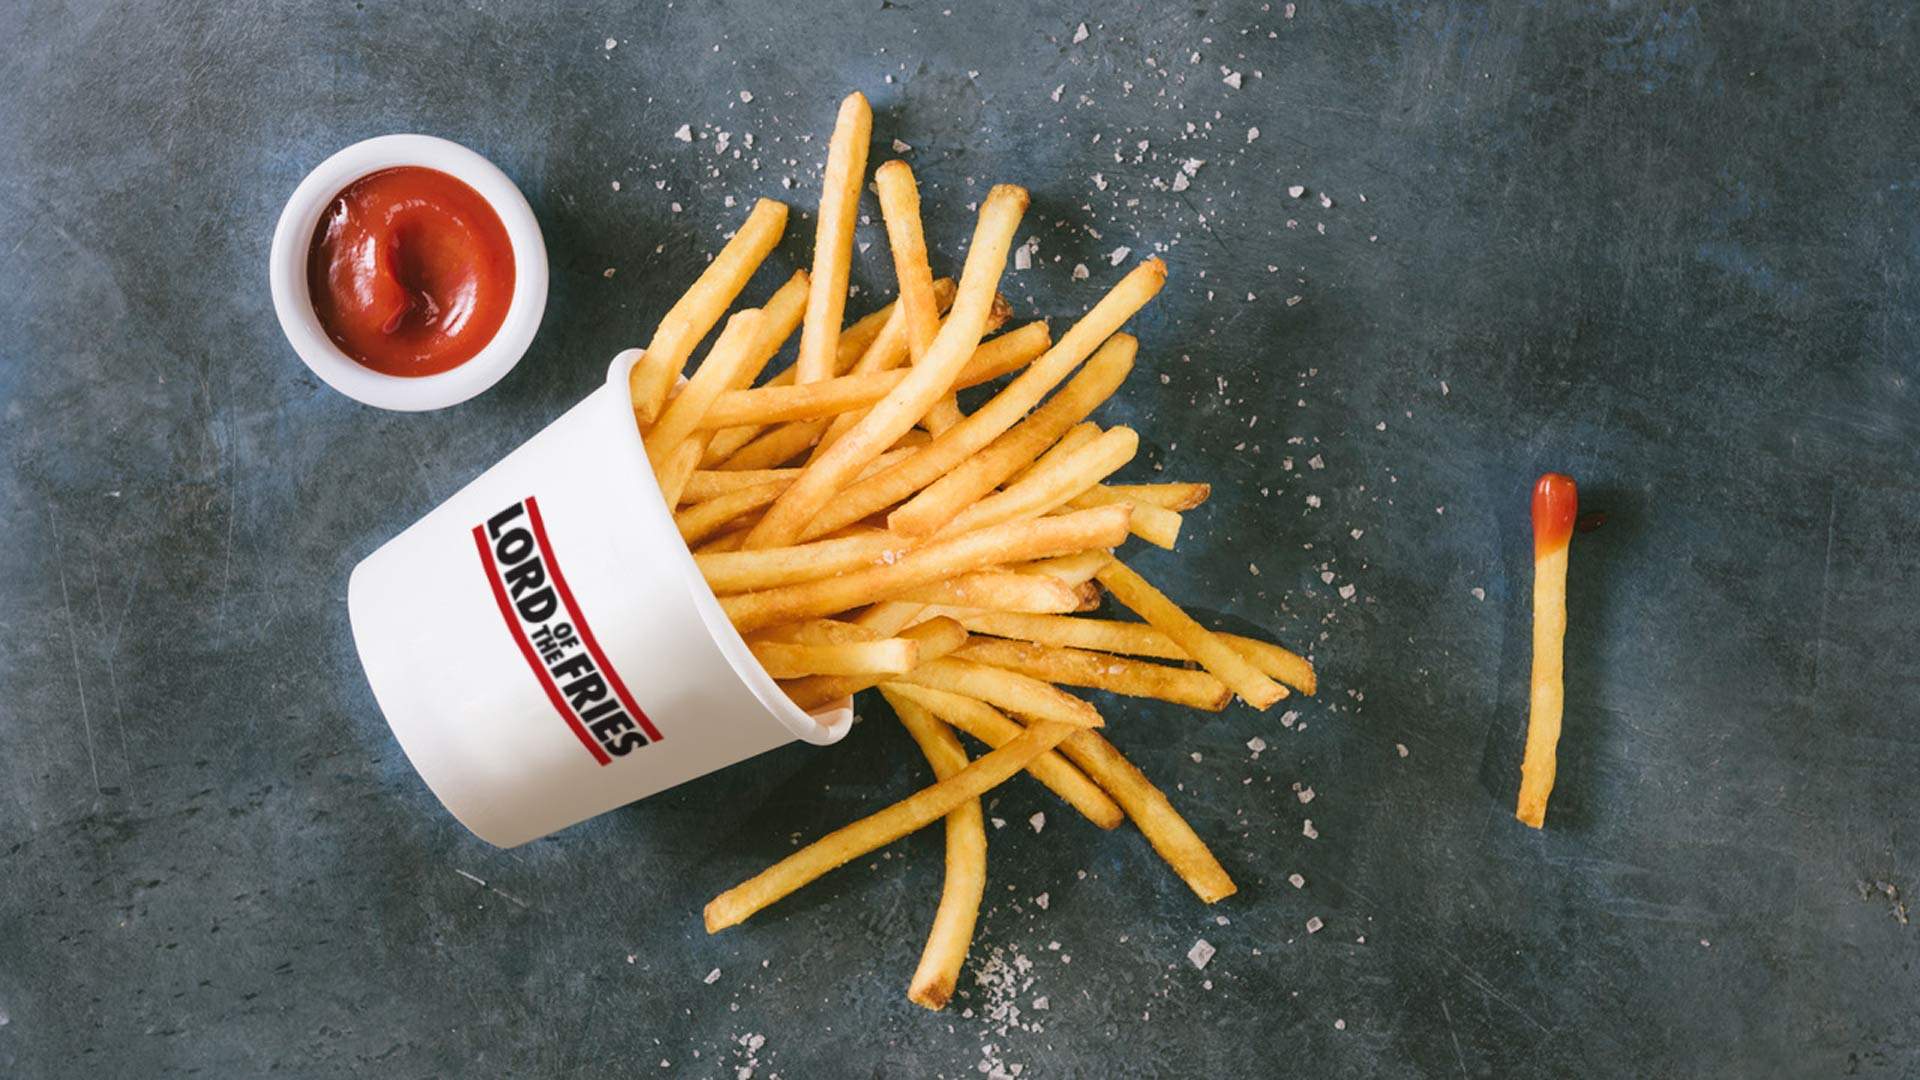 Lord of the Fries Is Giving Away Free Fries at All of Its Stores Next Week